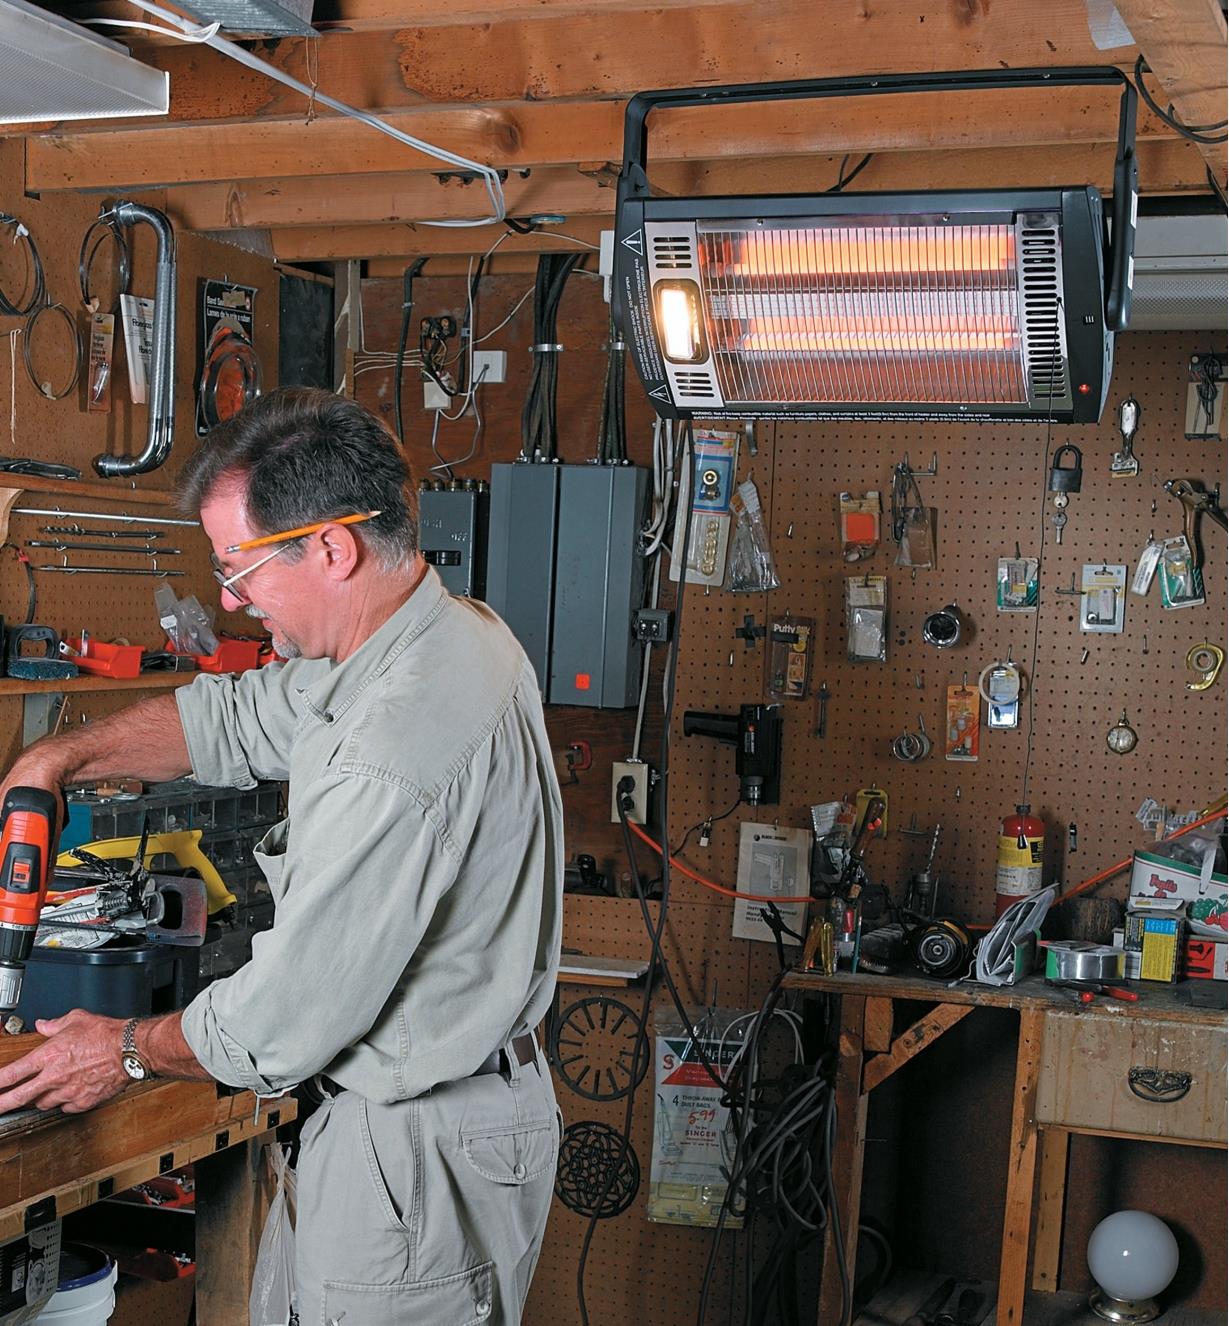 Person working in a workshop being warmed by a Quartz Overhead Radiant Heater suspended from the ceiling.